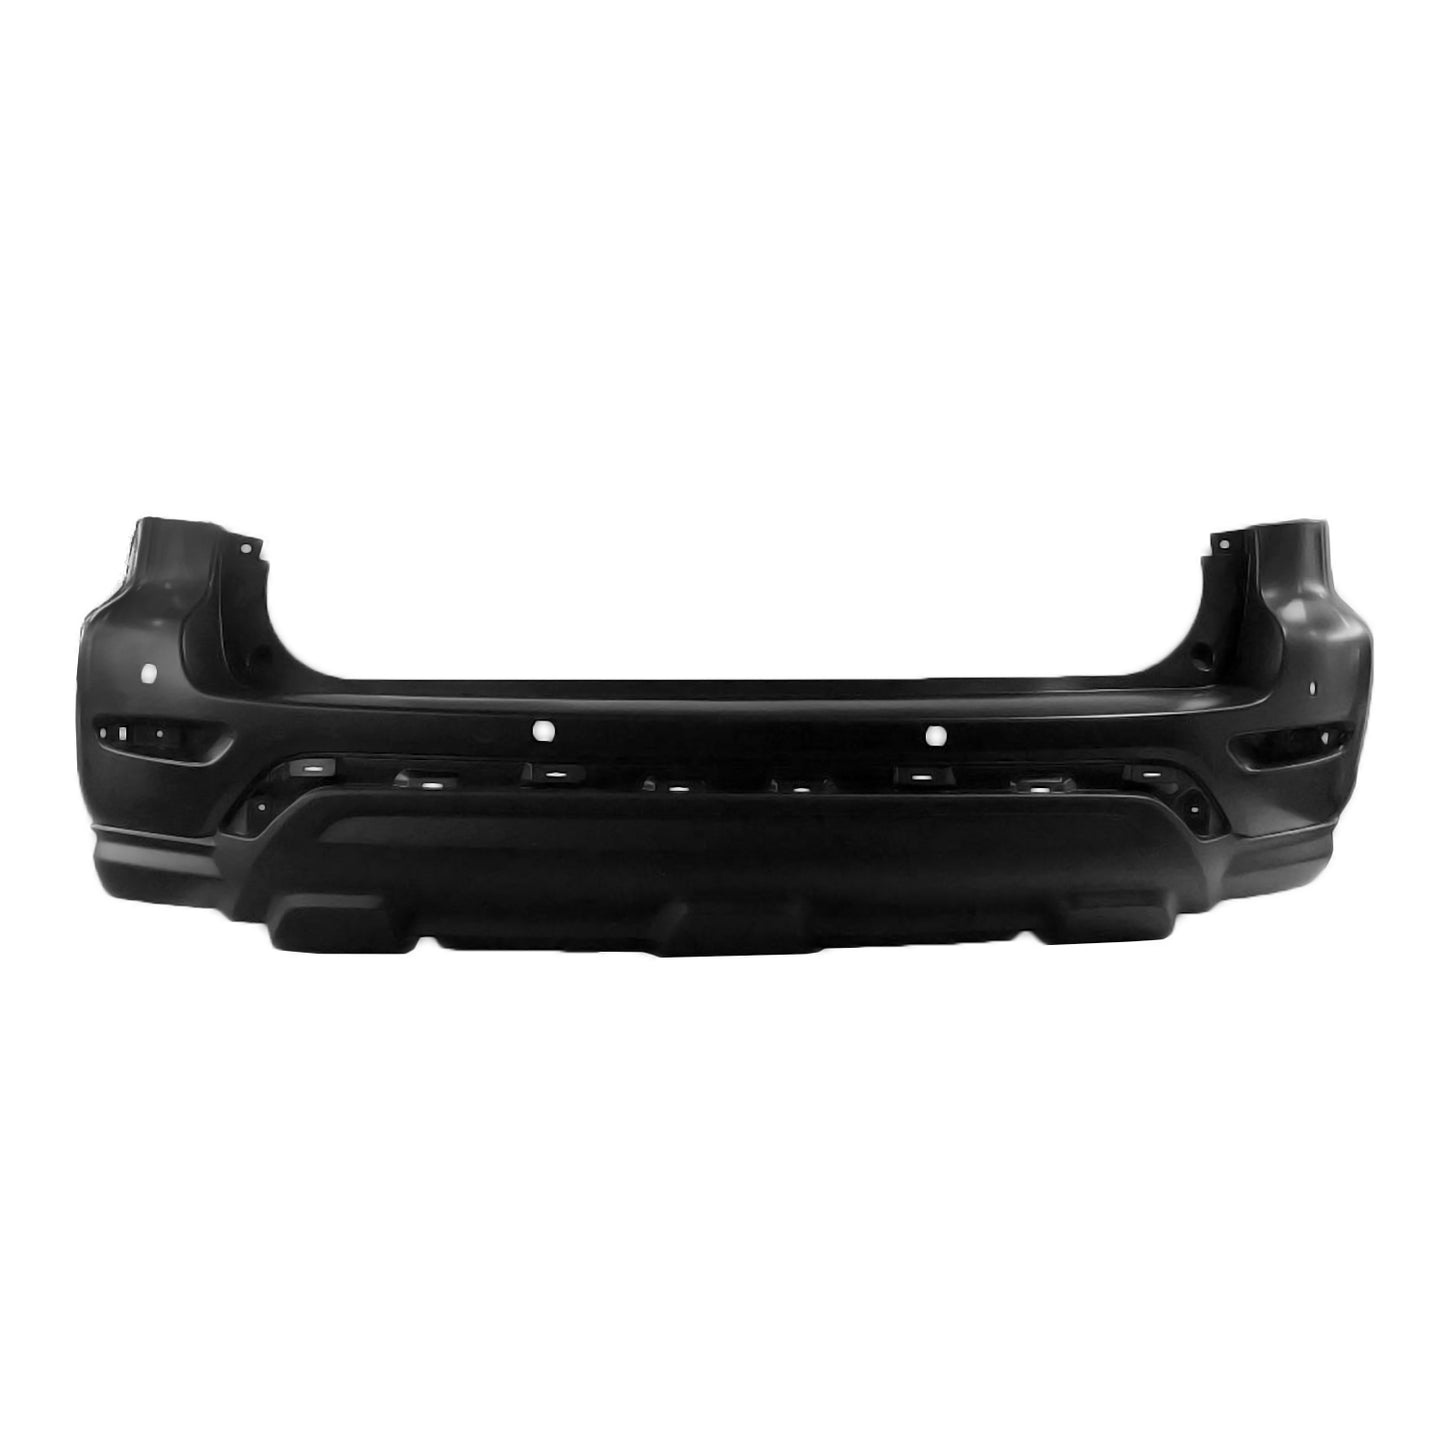 2430 | 2017-2019 NISSAN PATHFINDER Rear bumper cover w/Park Assist; w/o Towing Hitch; prime | NI1100315|850229PF3H